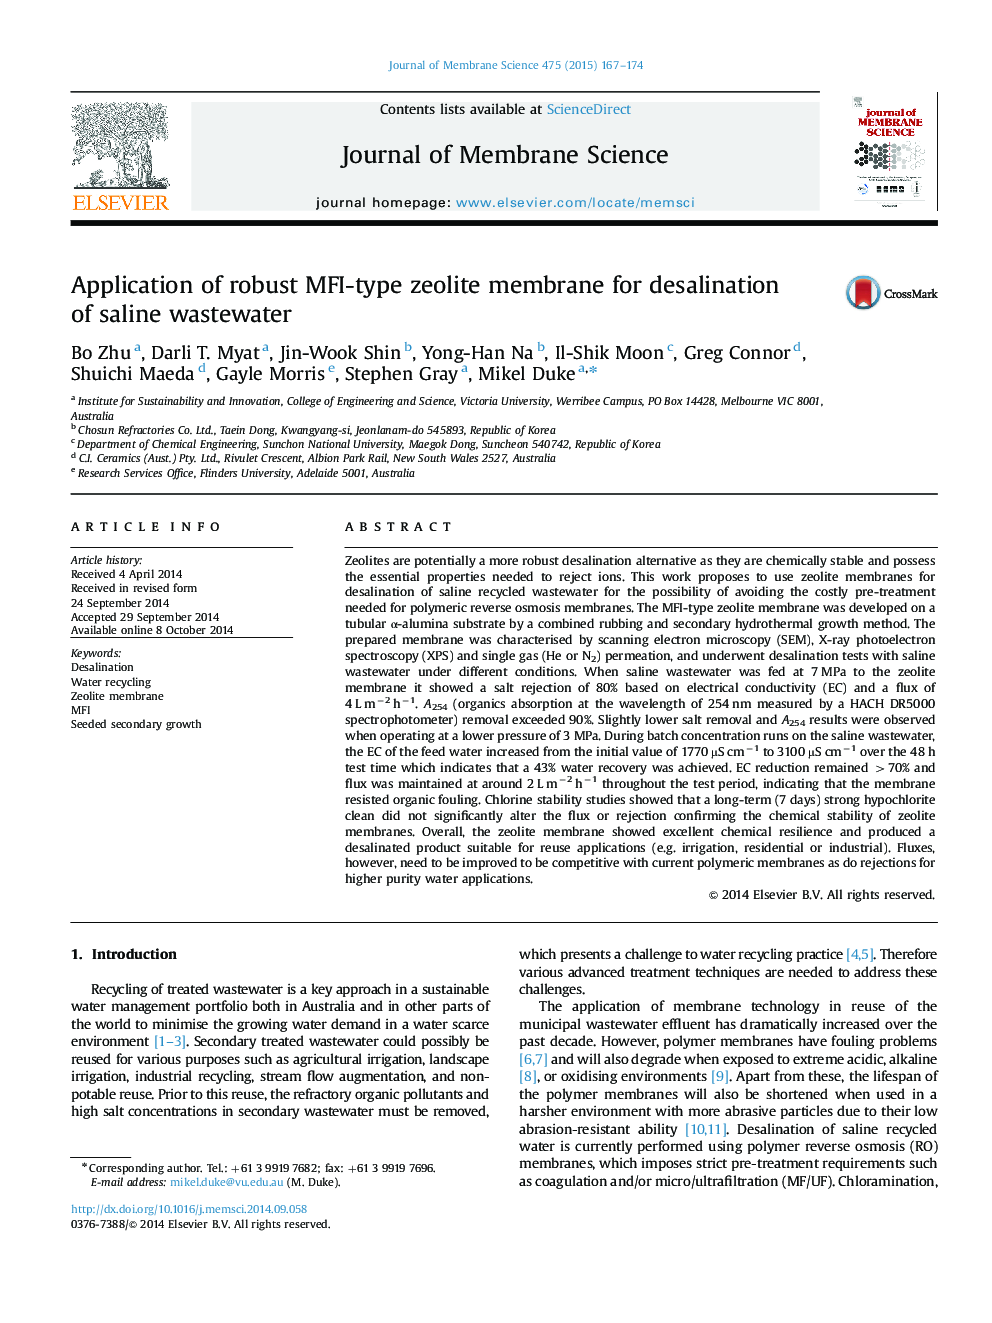 Application of robust MFI-type zeolite membrane for desalination of saline wastewater